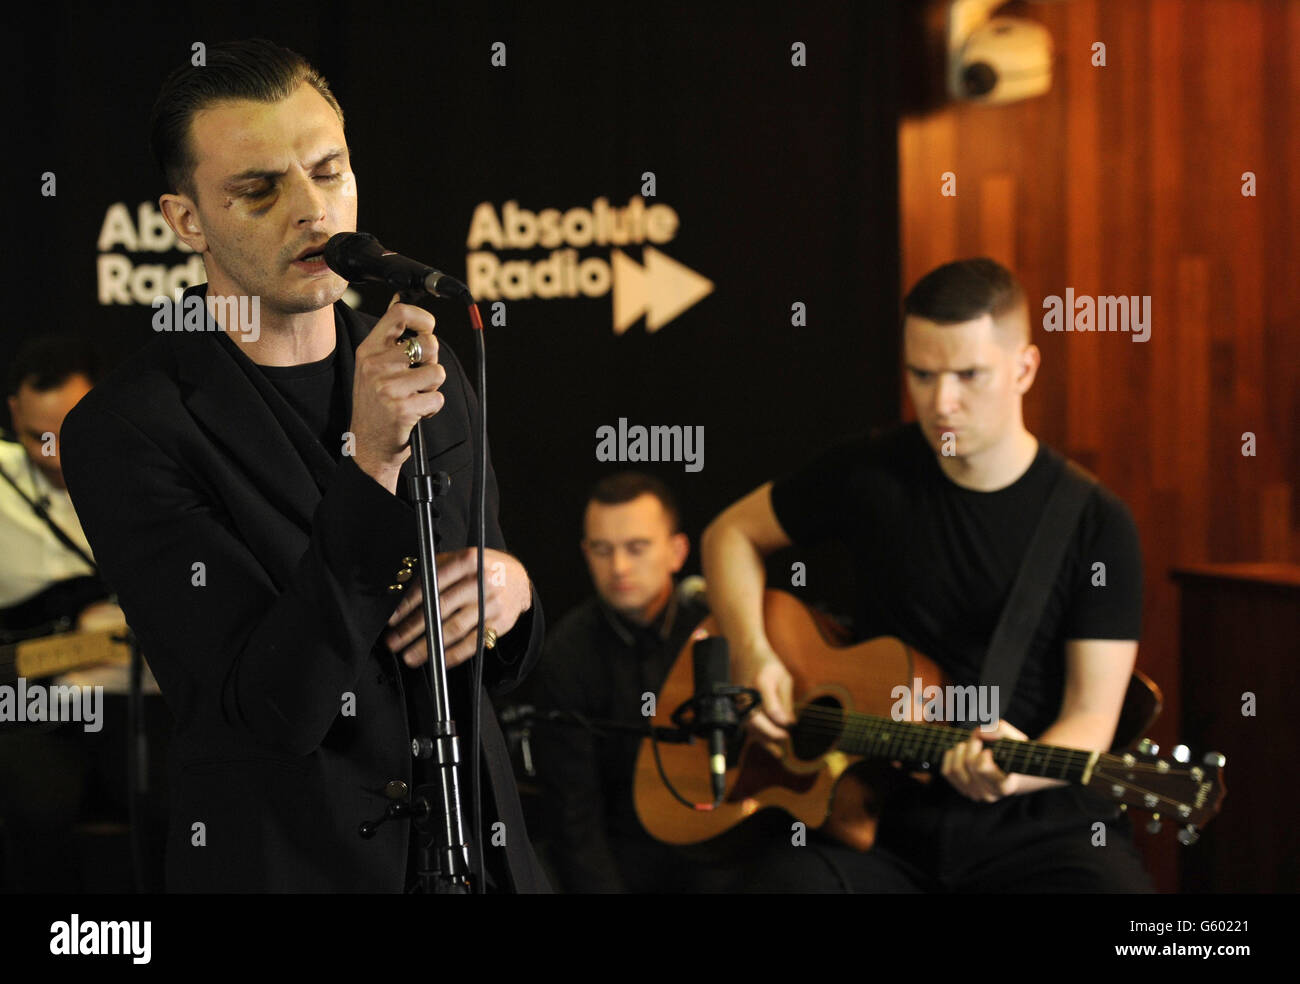 Theo Hutchcraft (left) and Adam Anderson (right) of Hurts perform during a live music session for Absolute Radio at their studios in London. Stock Photo